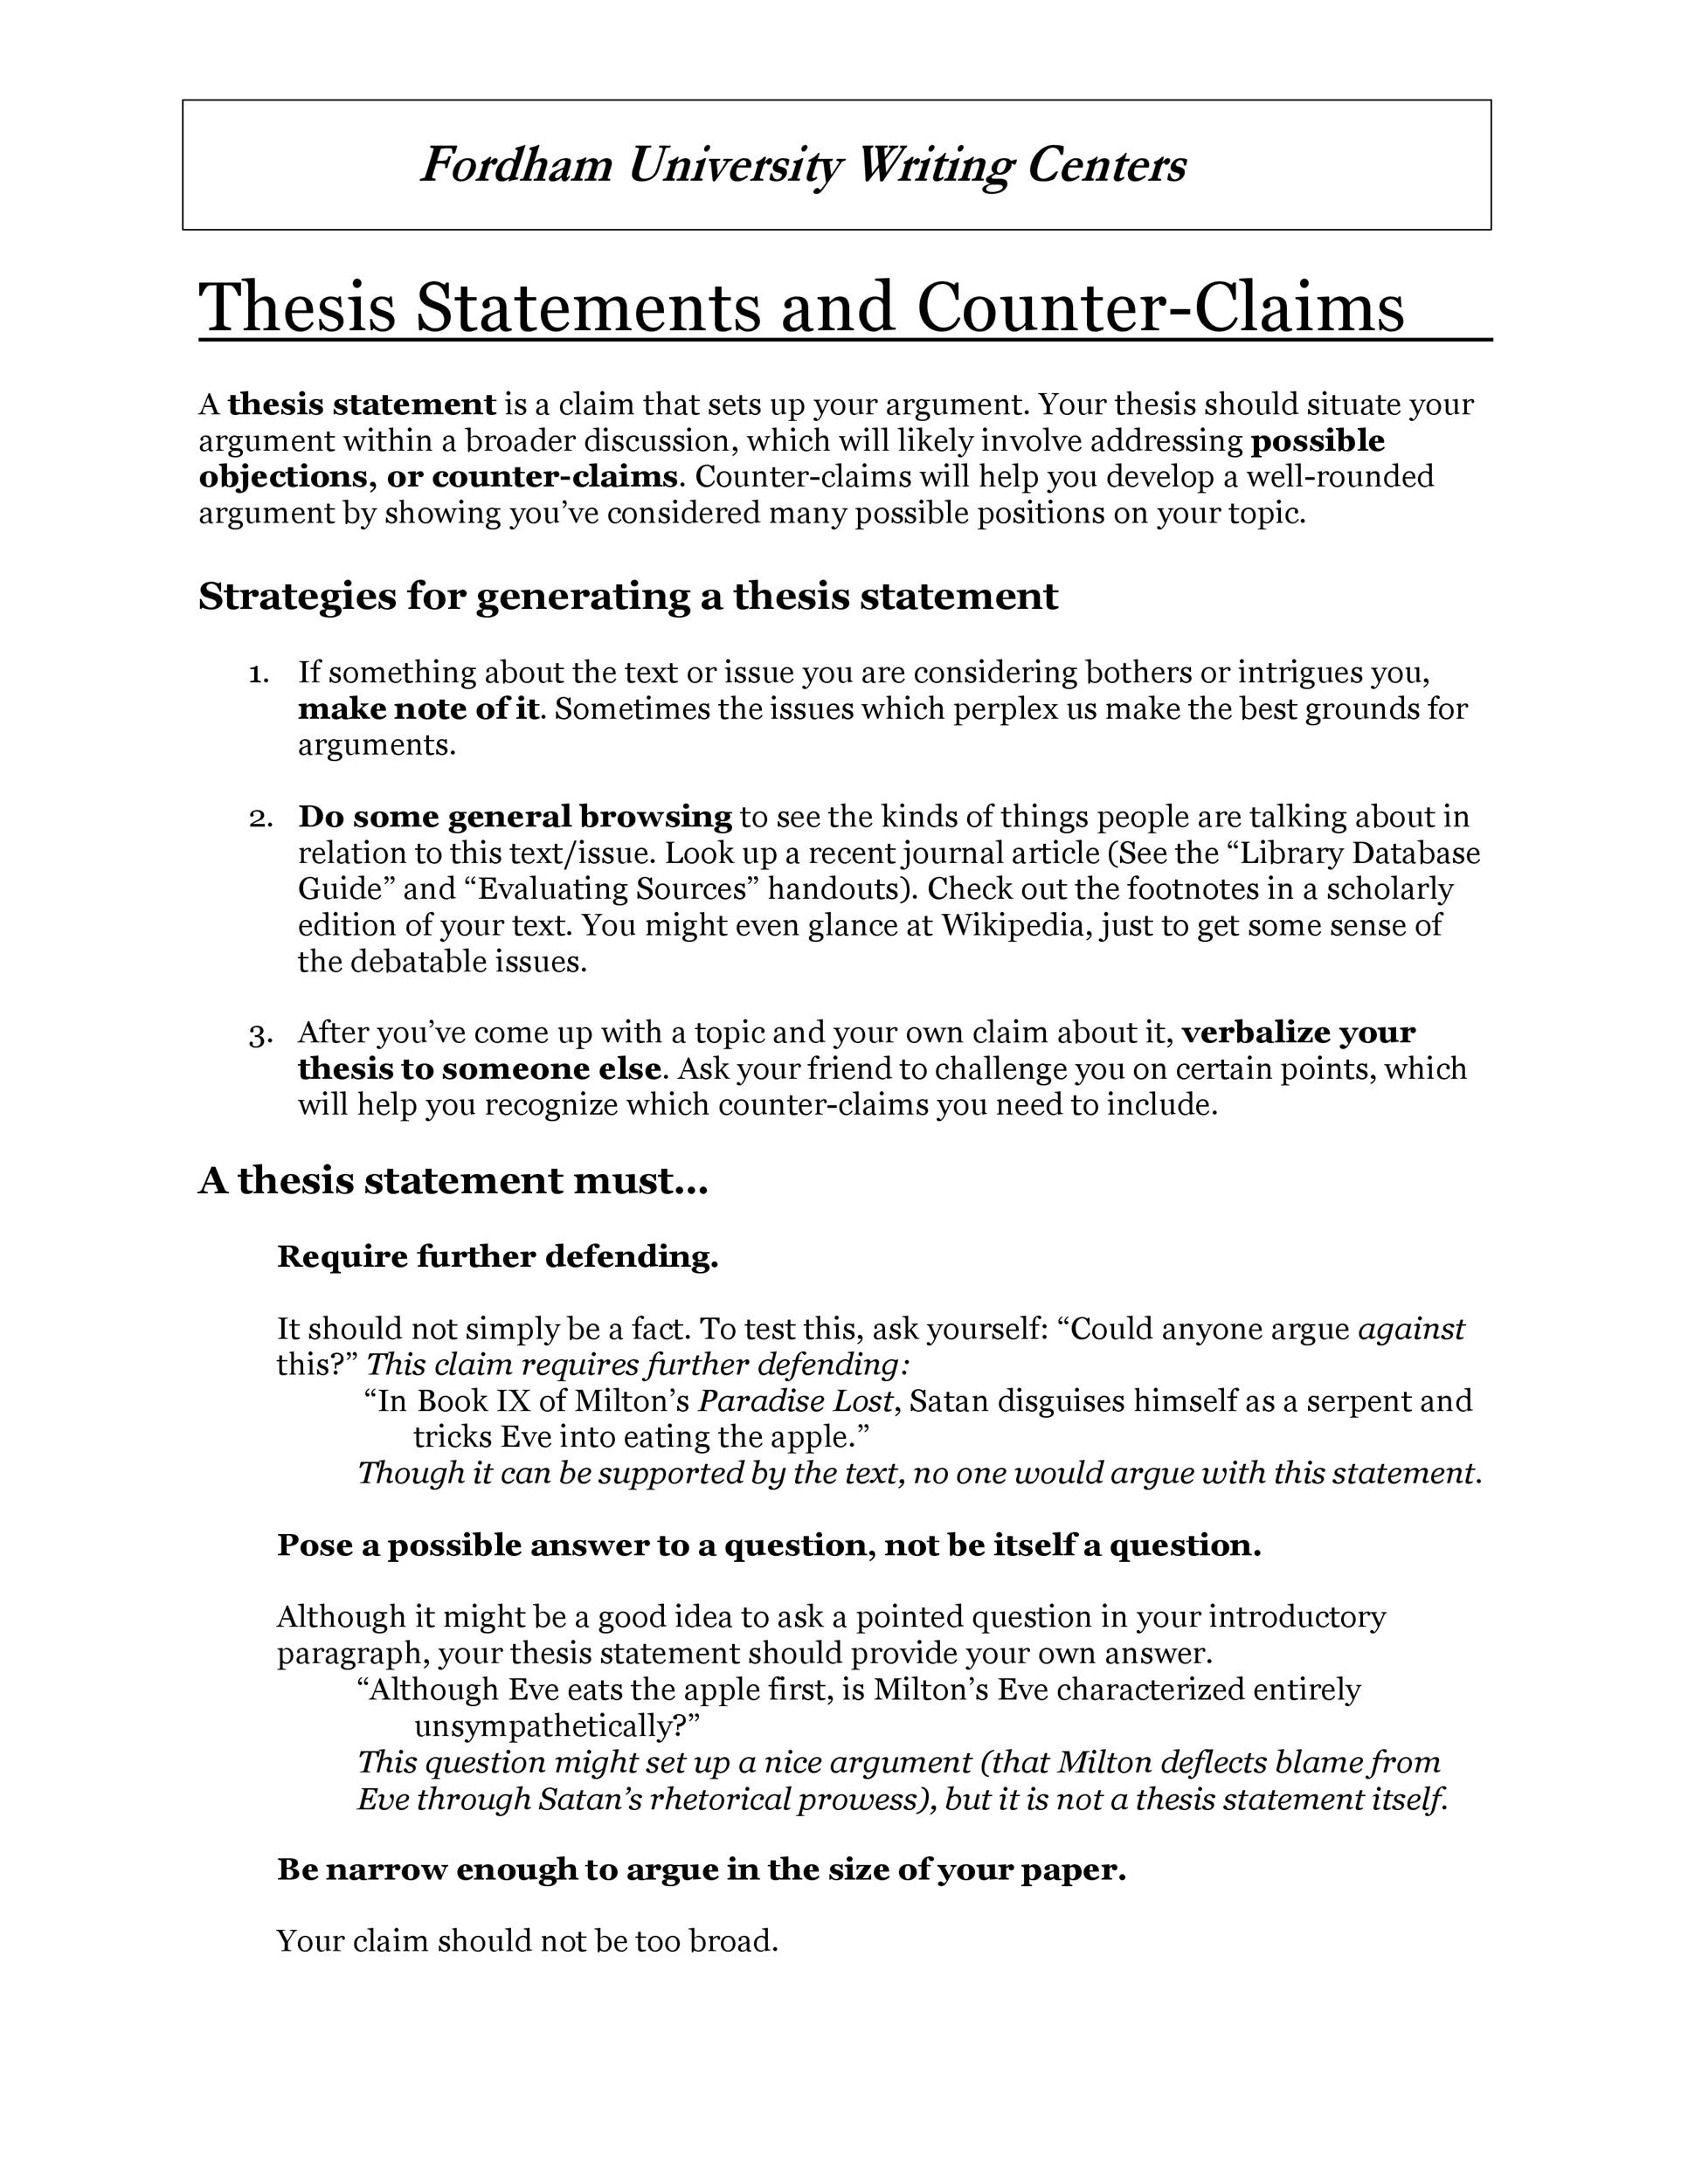 how to write a thesis statement on a person